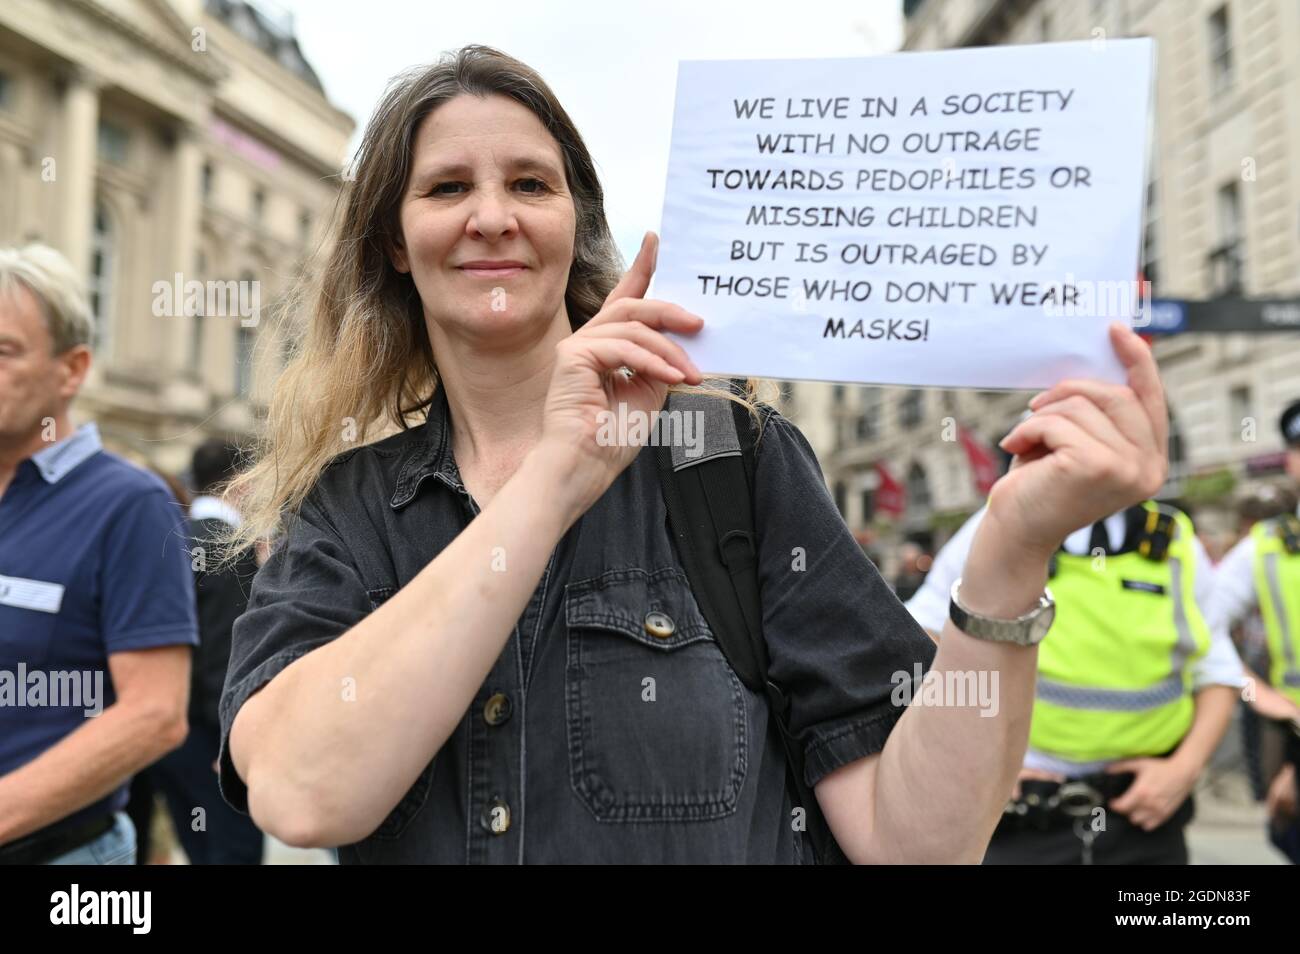 London, UK. 14 August 2021. Protesters march in London against vaccinations, vaccine passports and COVID restrictions. Credit: Andrea Domeniconi/Alamy Live News Stock Photo